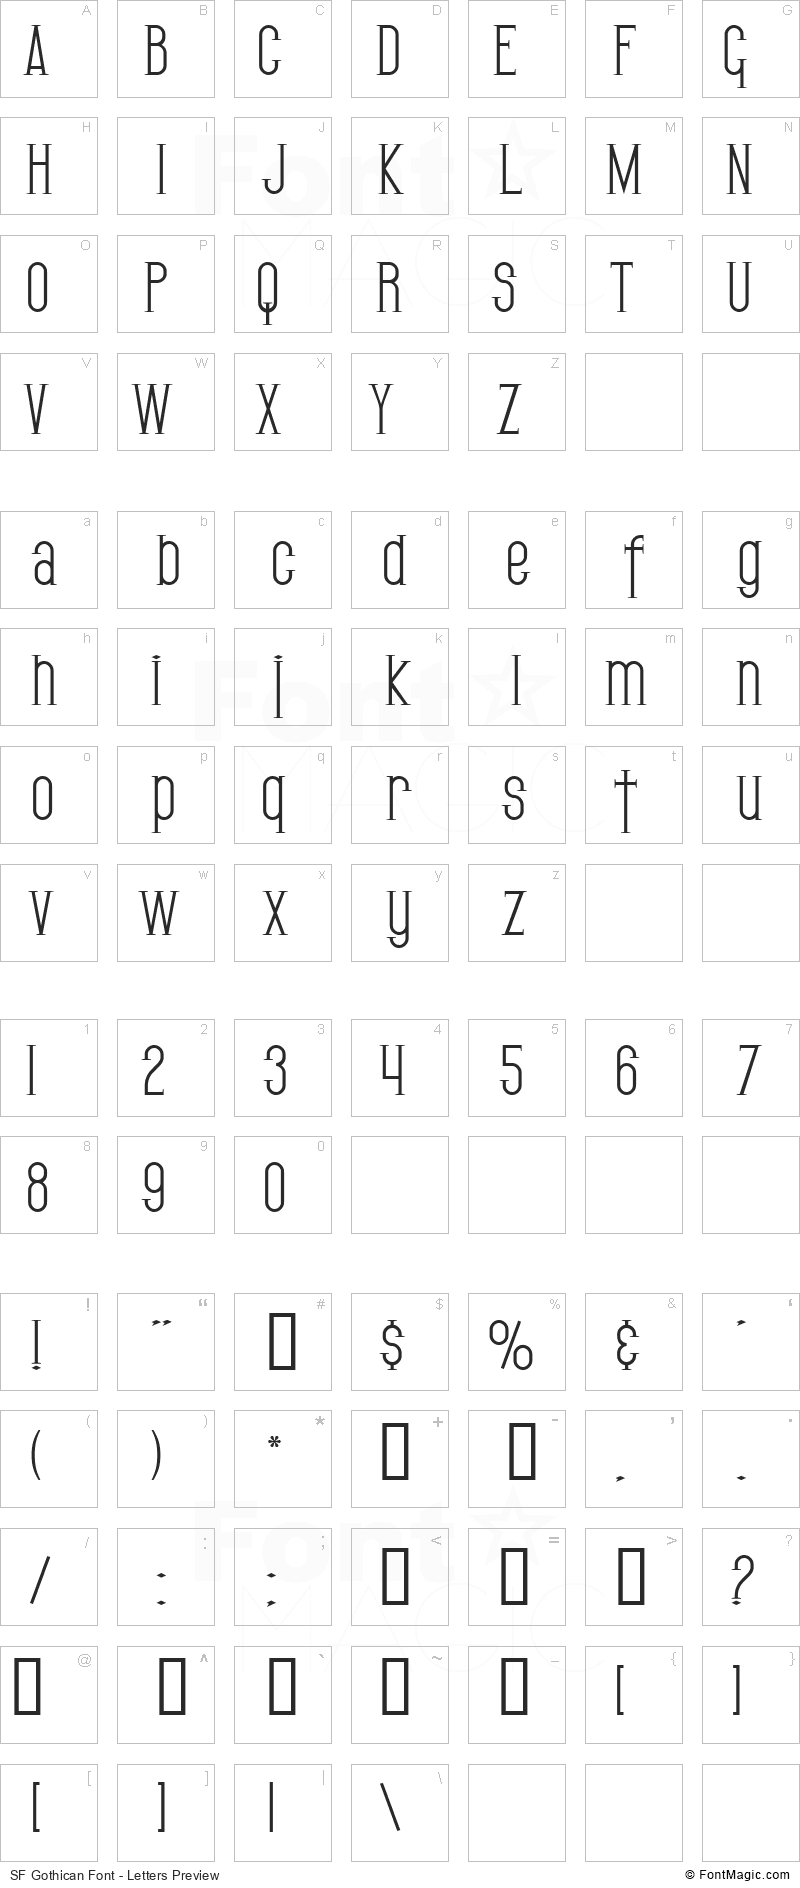 SF Gothican Font - All Latters Preview Chart